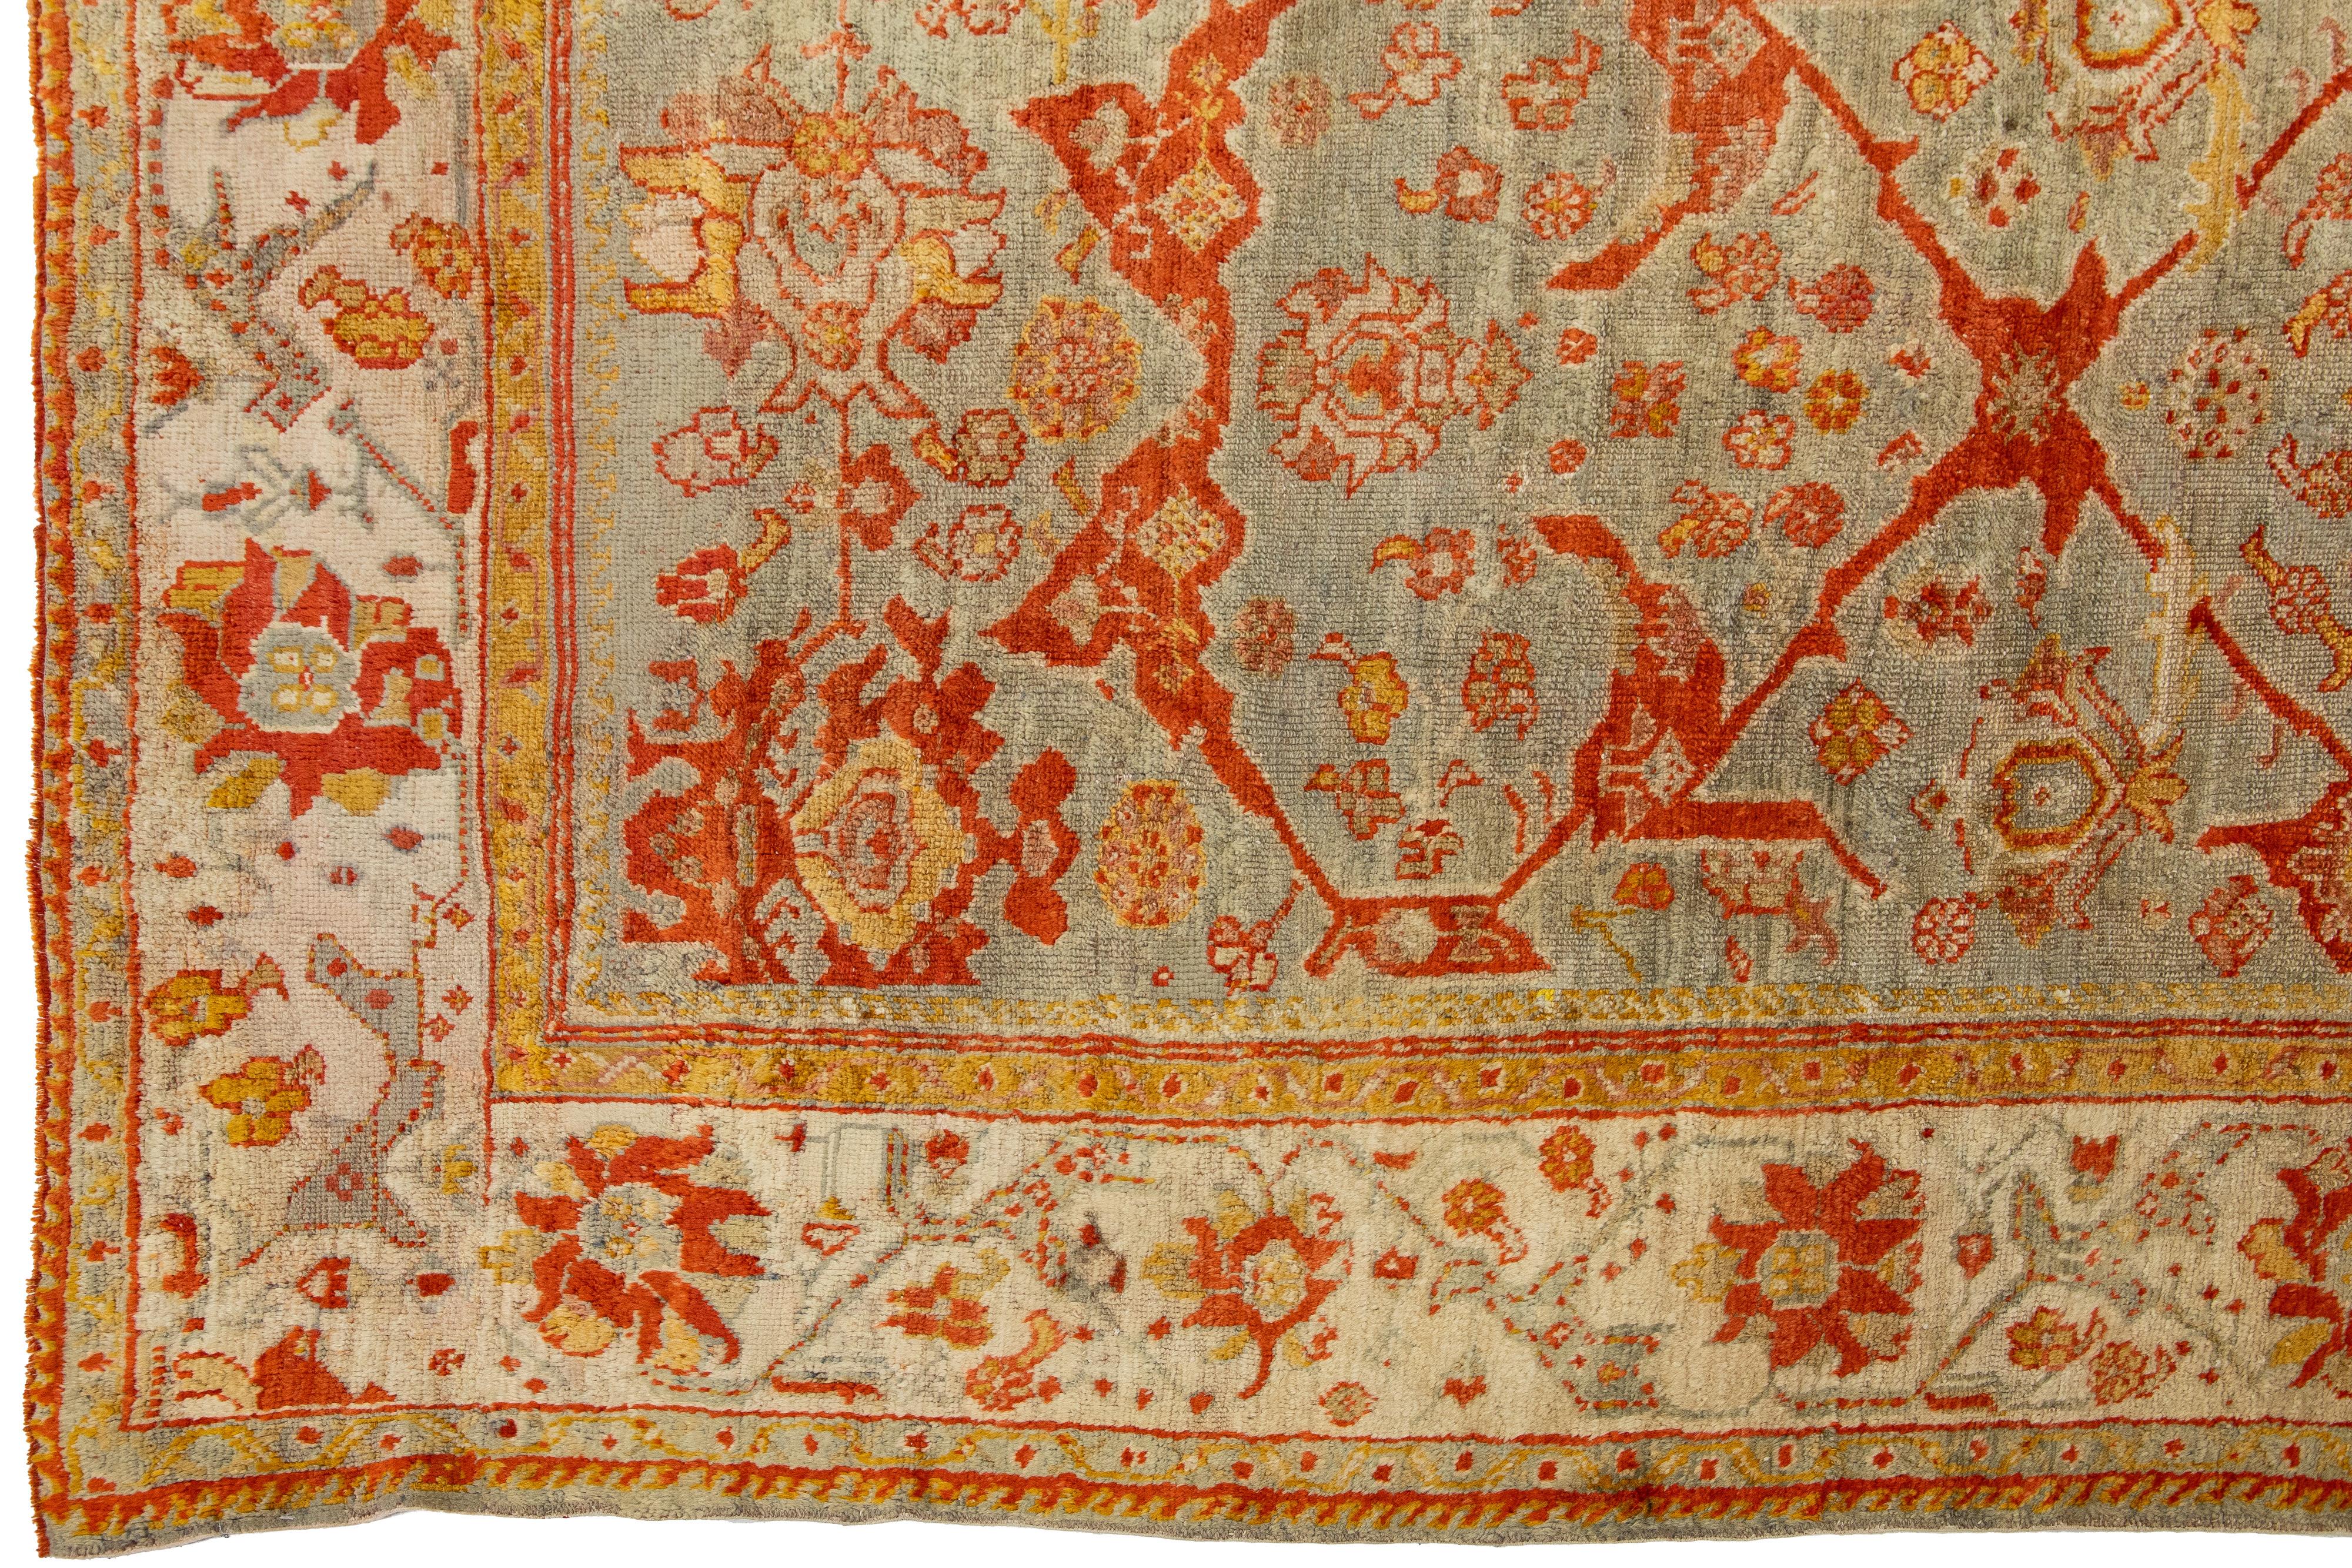 19th Century Turkish Oushak Antique Wool Rug Handmade Featuring a Floral Pattern In Rust  For Sale